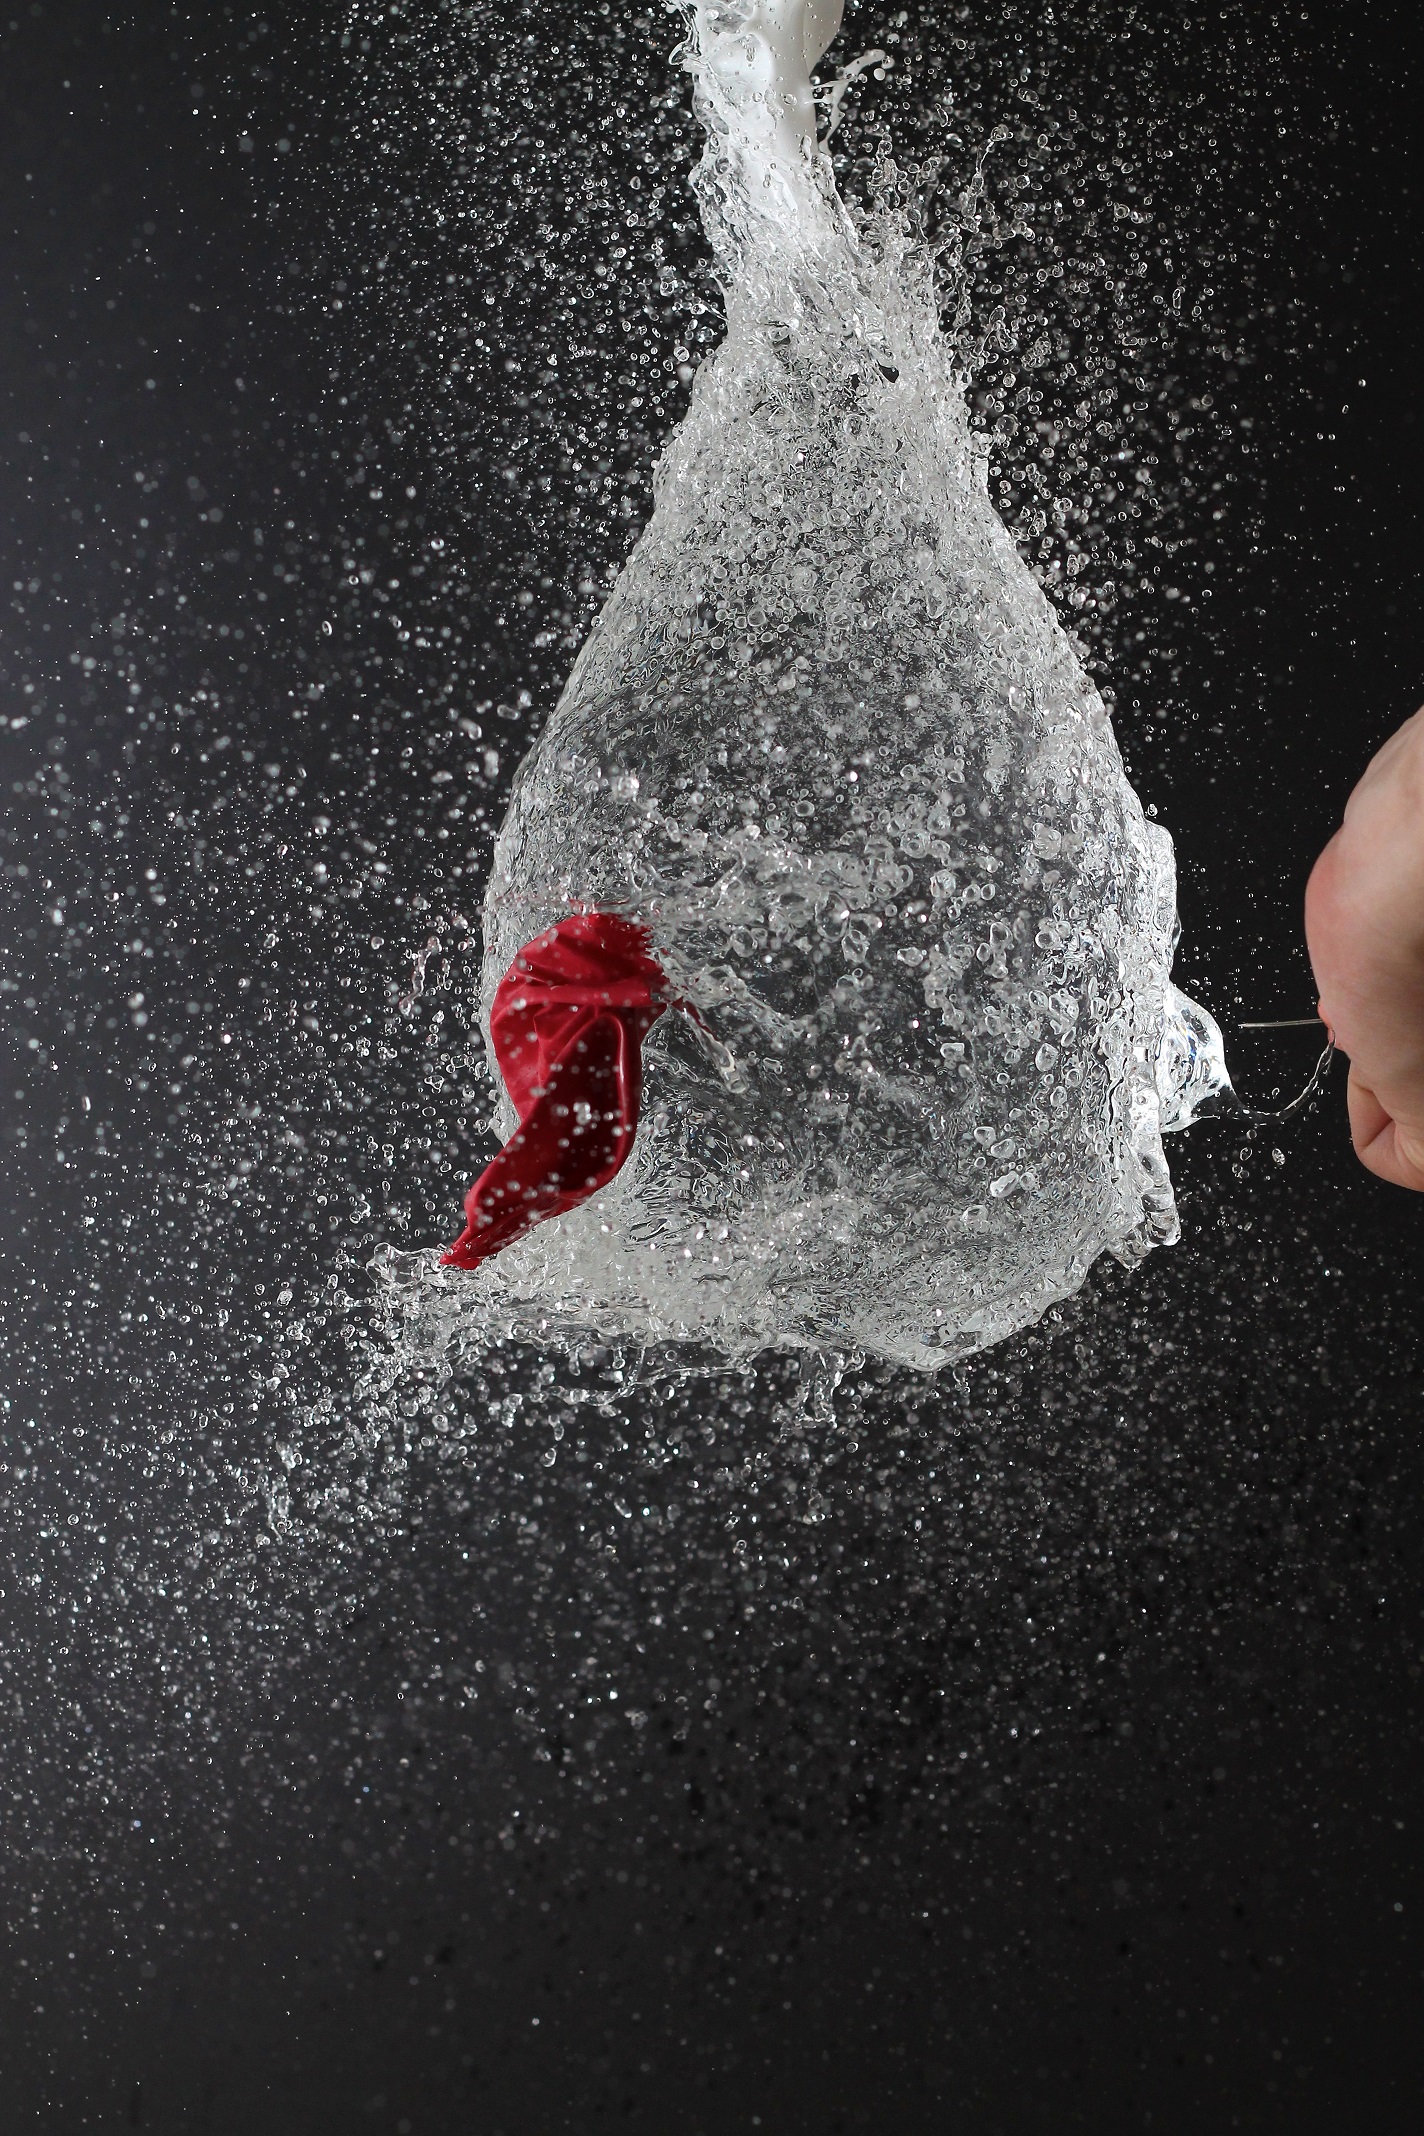 Water balloon being punctured in slow motion